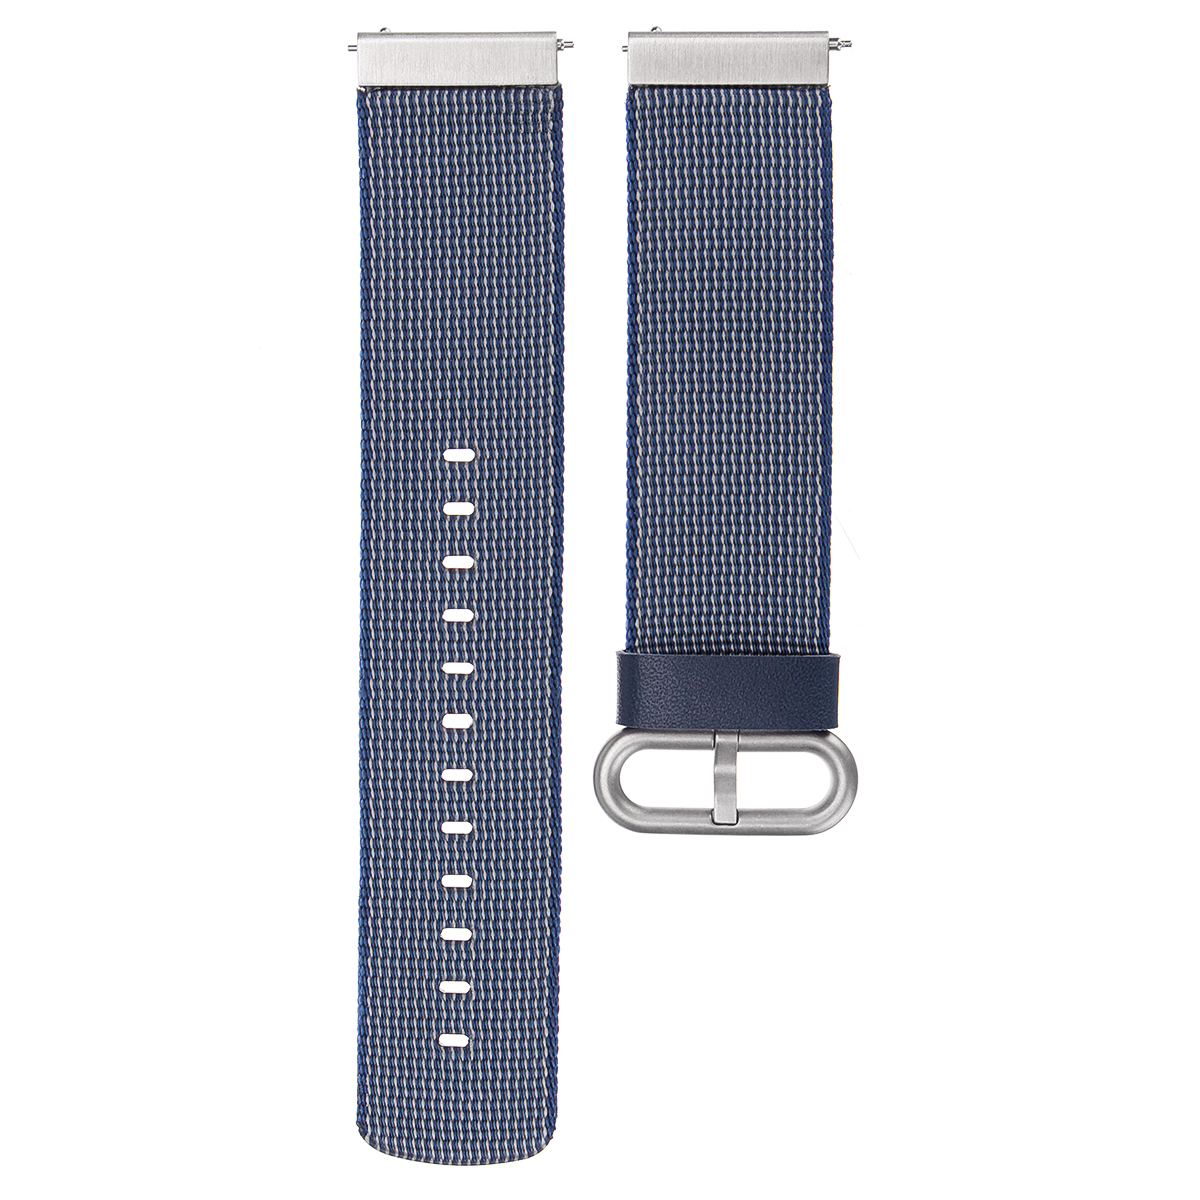 Replacement-Watch-Band-Strap-Wristband-Nylon-Loop-for-Fitbit-Versa-Sport-Watch-1308057-7